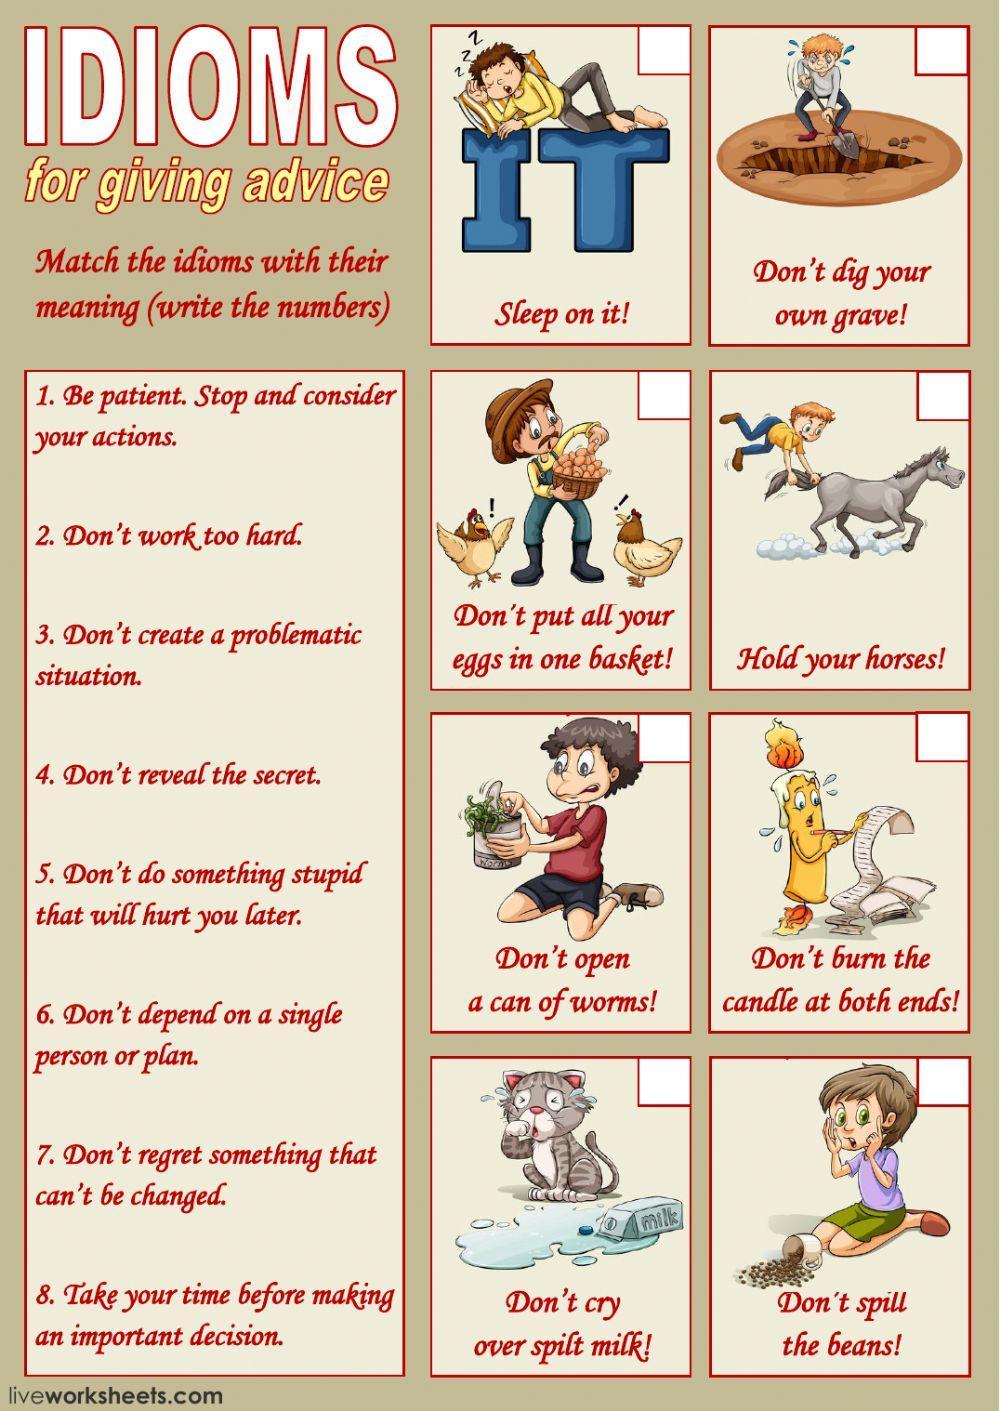 Idioms for giving advice 1